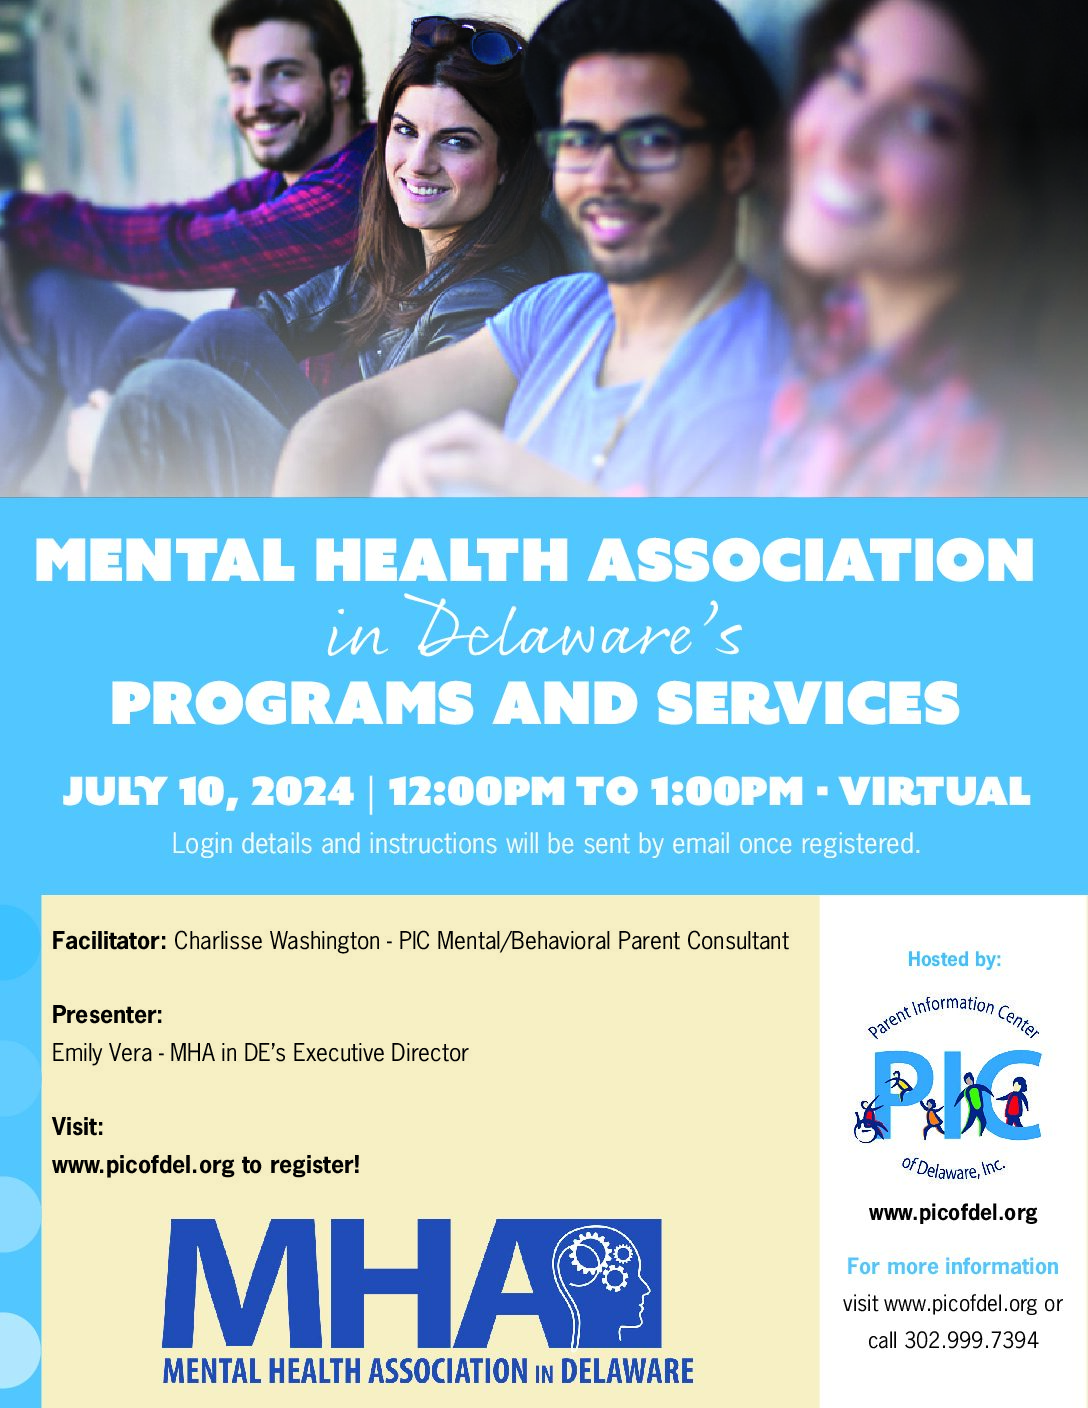 Mental Health Association in Delaware/Services Overview